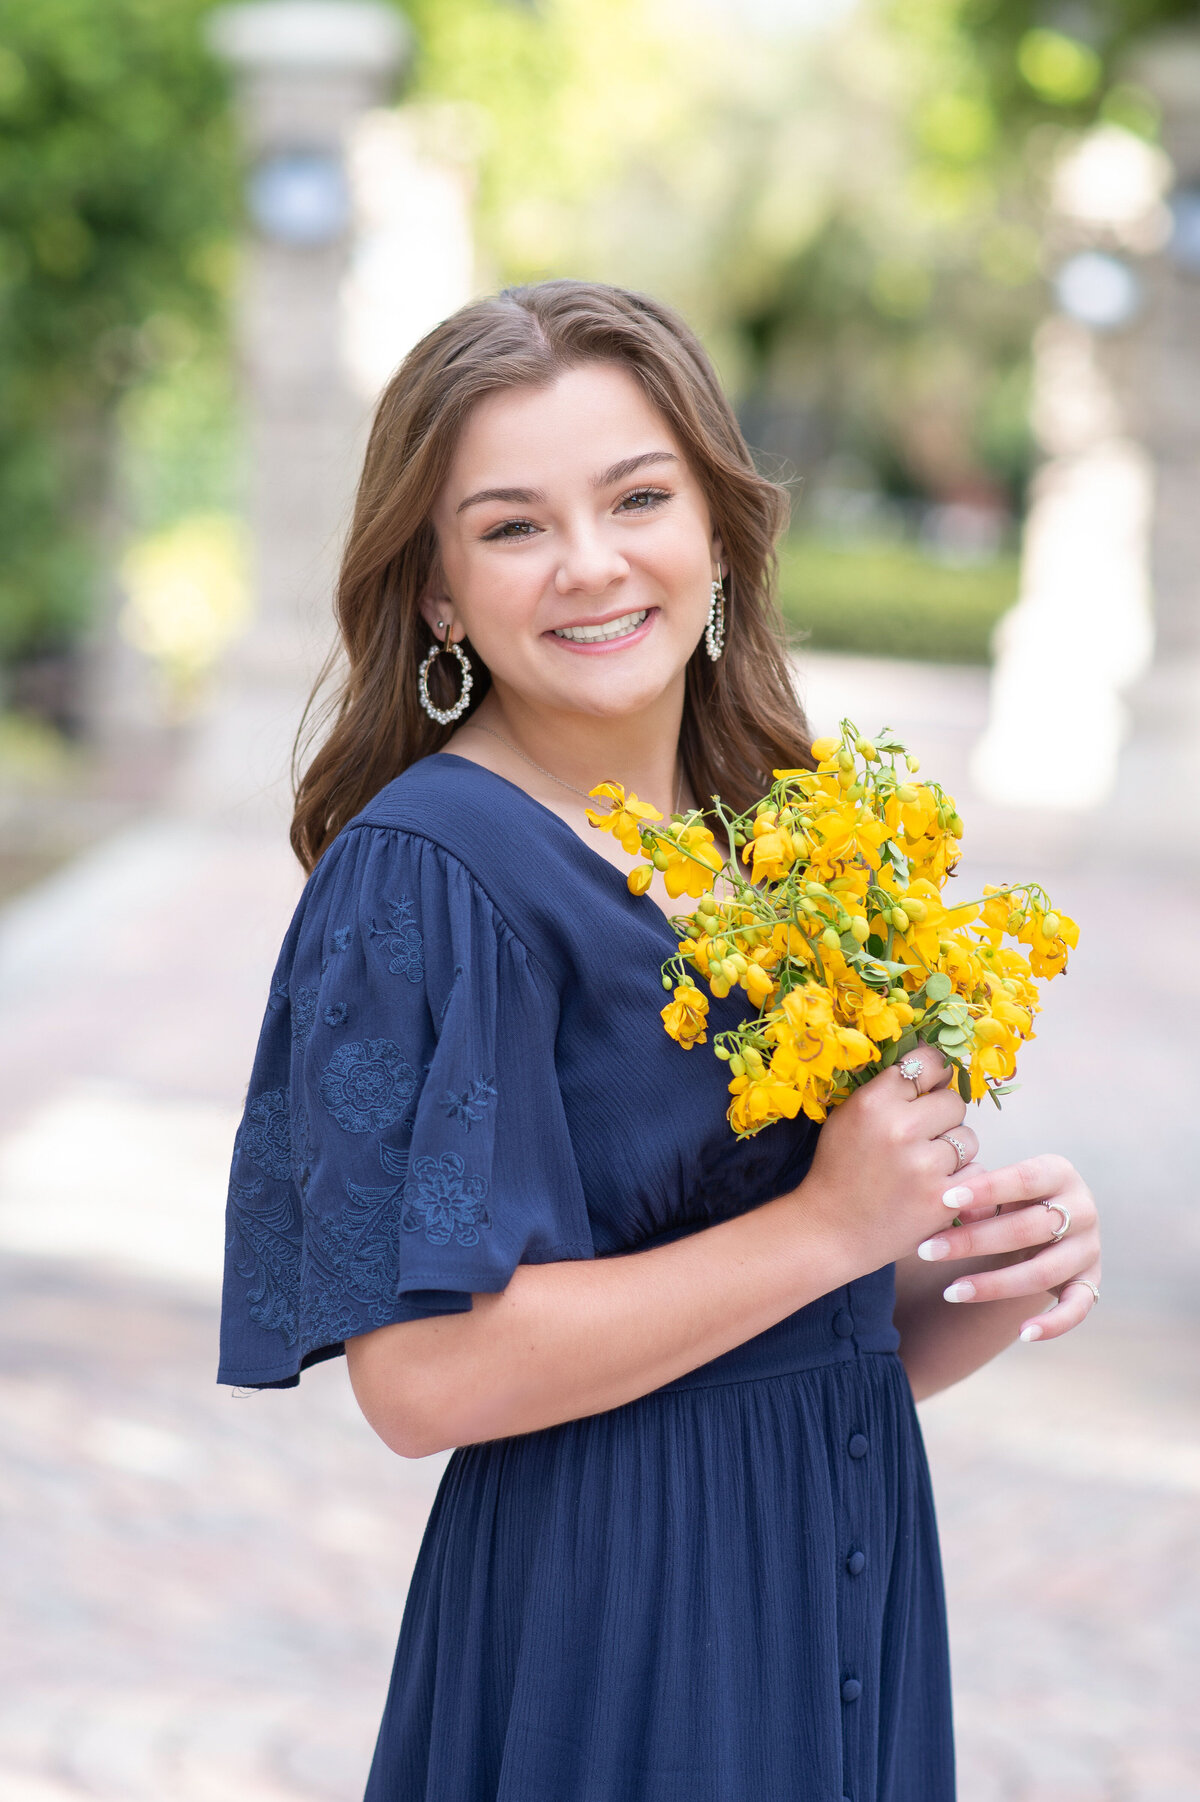 High school senior girl wearing a blue dress holing yellow flowers smiles at camera.